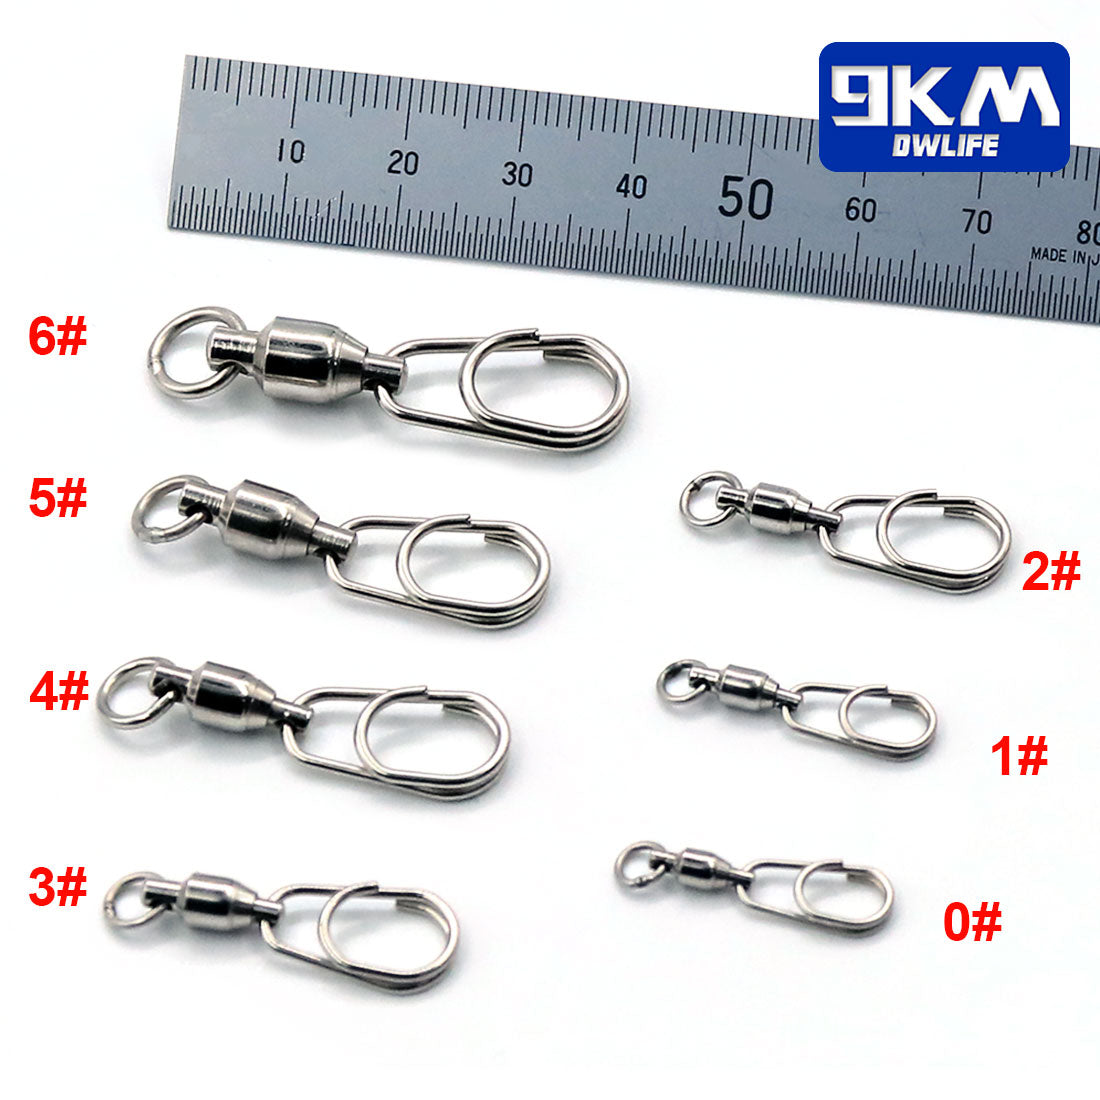 30PCS Fishing Snap Rolling Ball Bearing Barrel Clip Bulk Swivel with Safety  Snap Connector Fishing Accessories Freshwater Saltwater #2#4#6#8#10 +A